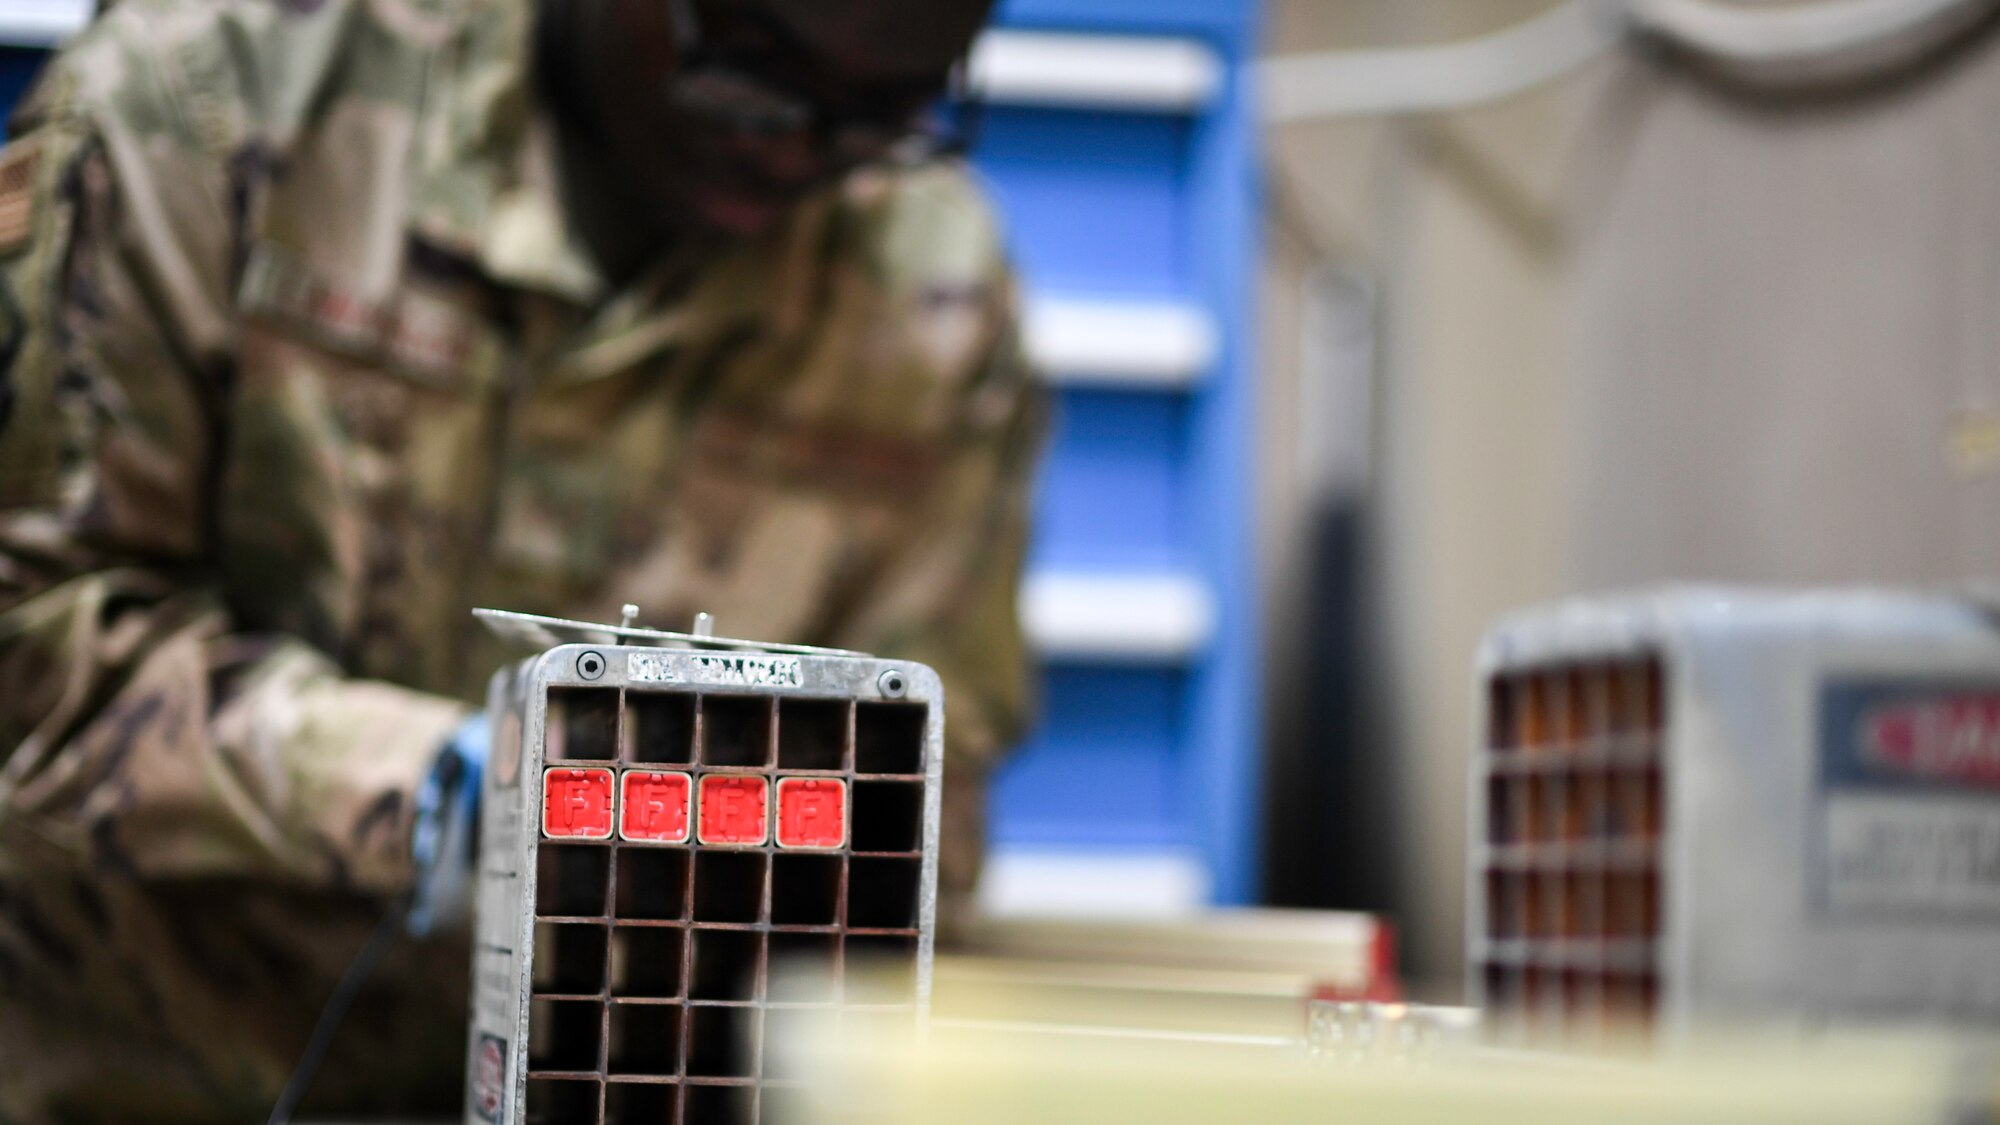 U.S. Air Force Senior Airman Samson Lawanson, 386th Expeditionary Maintenance Squadron munitions technician journeyman, installs flares into a housing module at Ali Al Salem Air Base, Kuwait, July 18, 2019. Housing modules can carry a variety of “cocktails” to include flares, chaff or a mixture of both to be used as munitions or as an electronic countermeasure. (U.S. Air Force photo by Staff. Sgt. Mozer O. Da Cunha)